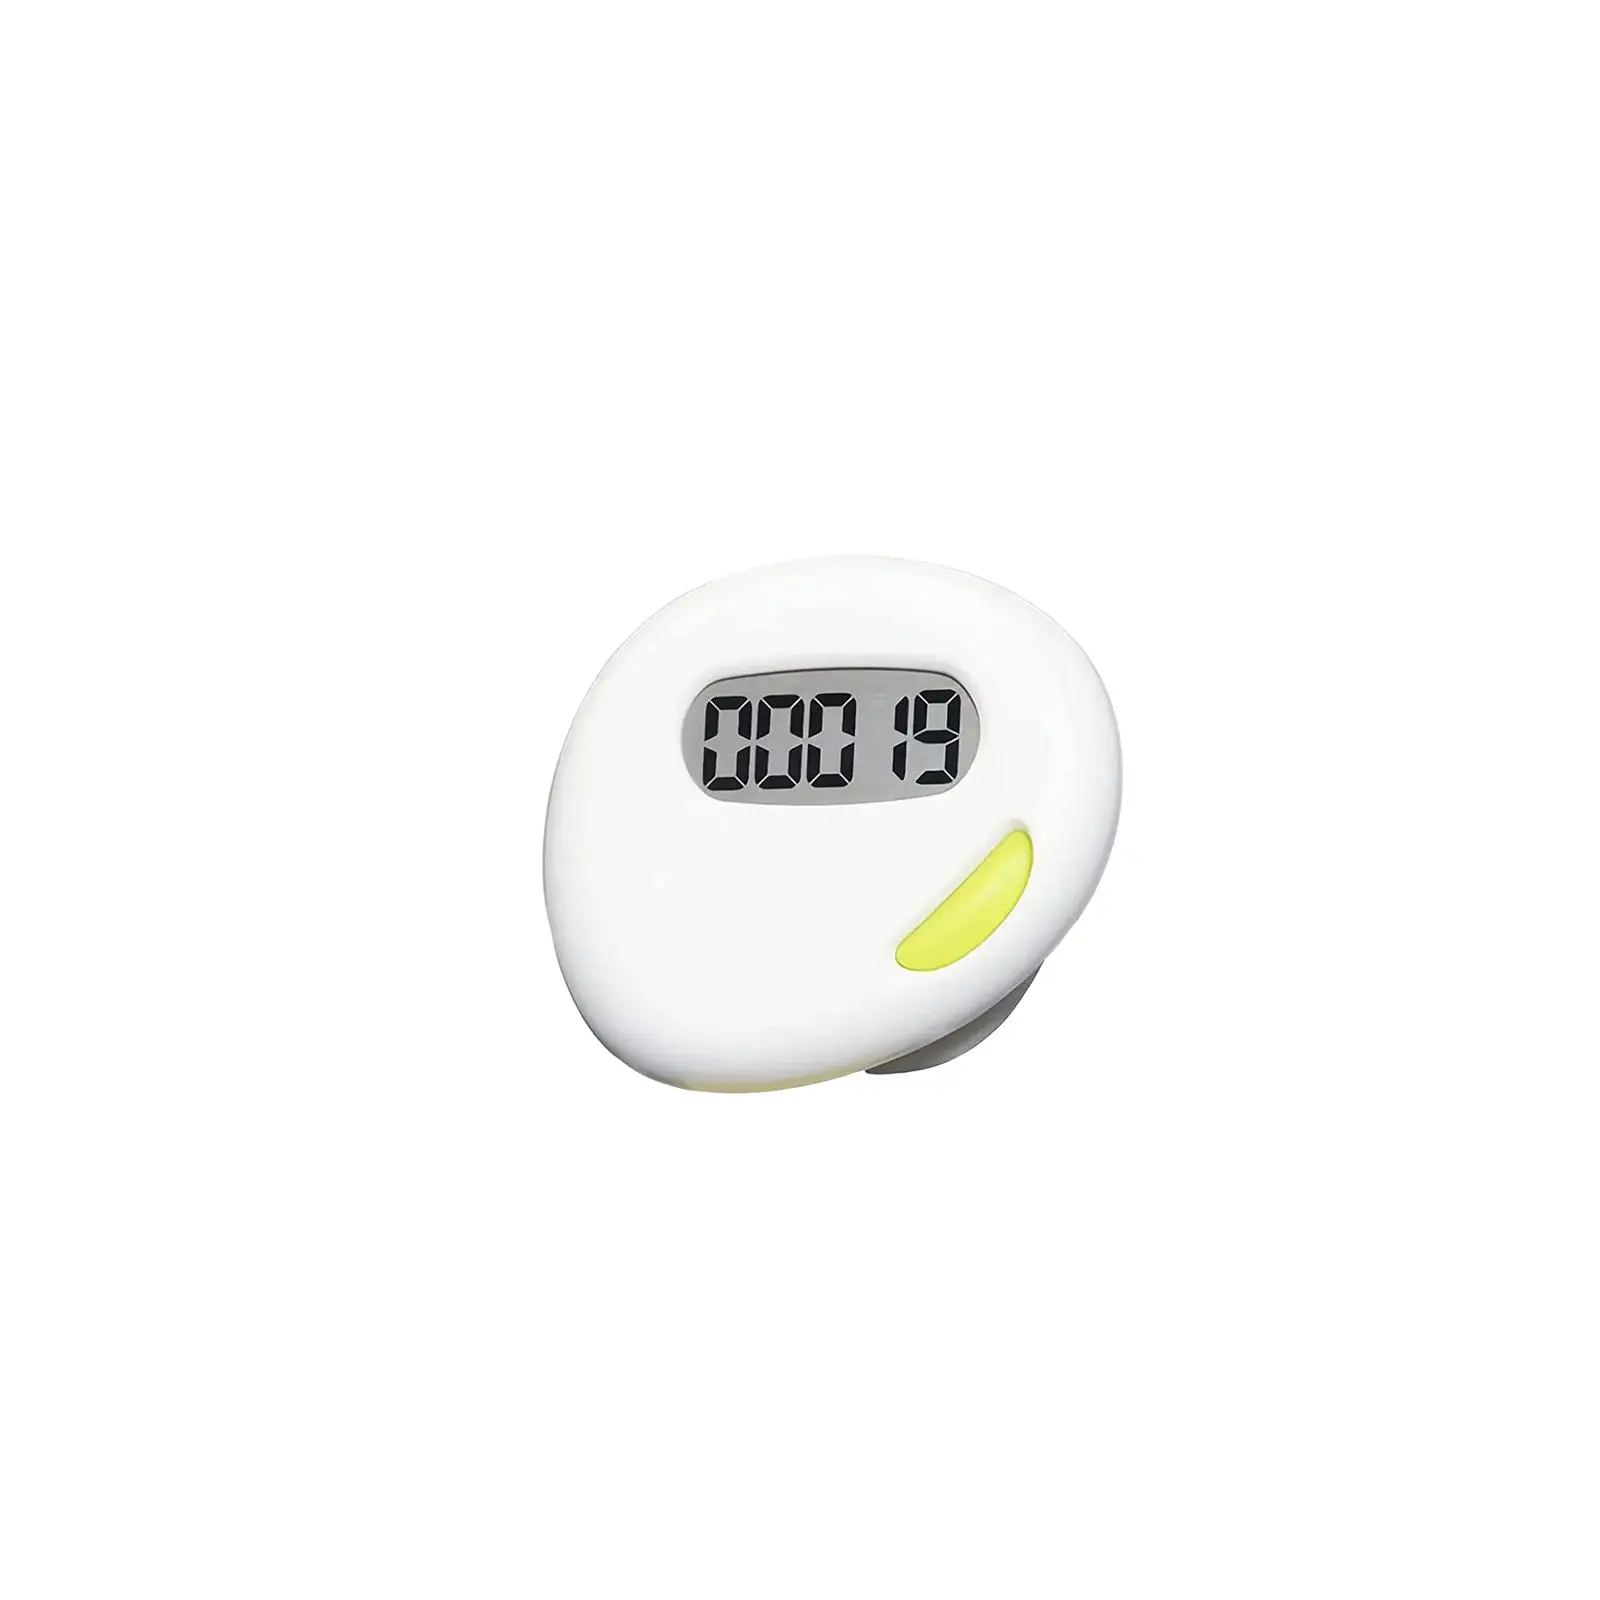 Portable 2D Digital Pedometer Electronic Pedometer for Women Fitness